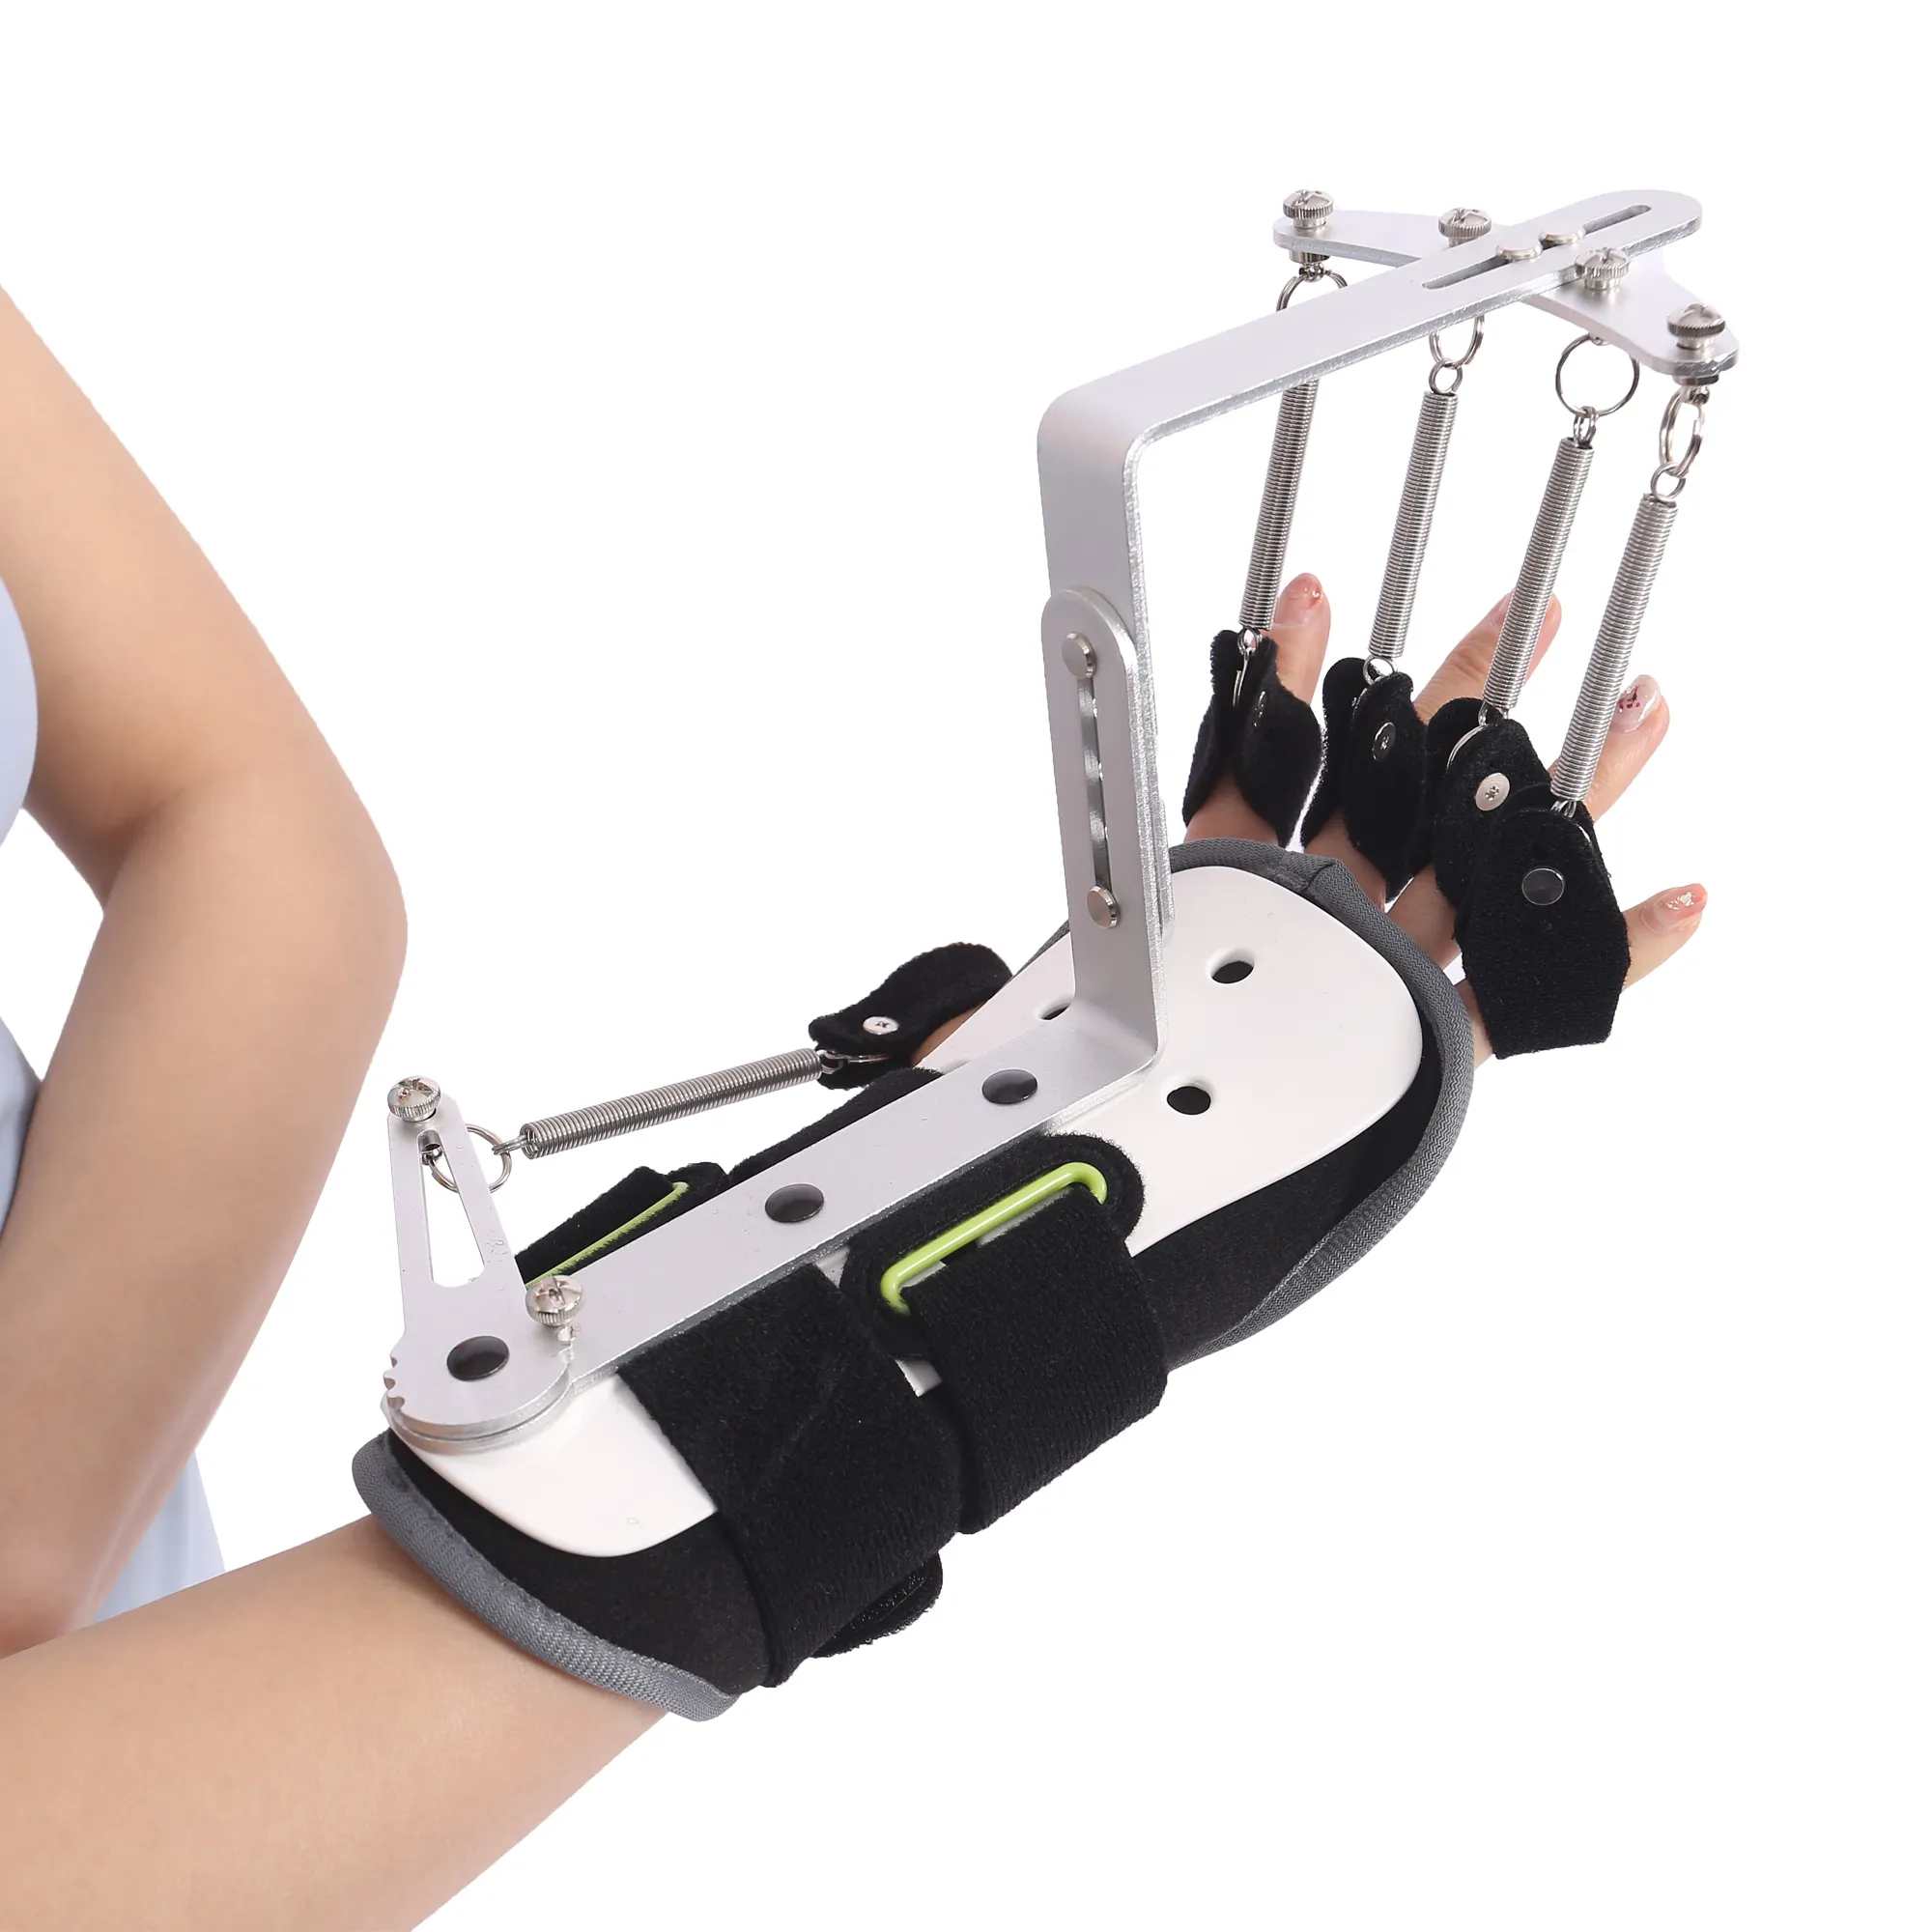 2021 New Product Medical Dynamic Hand Splint Wrist And Finger Trainer